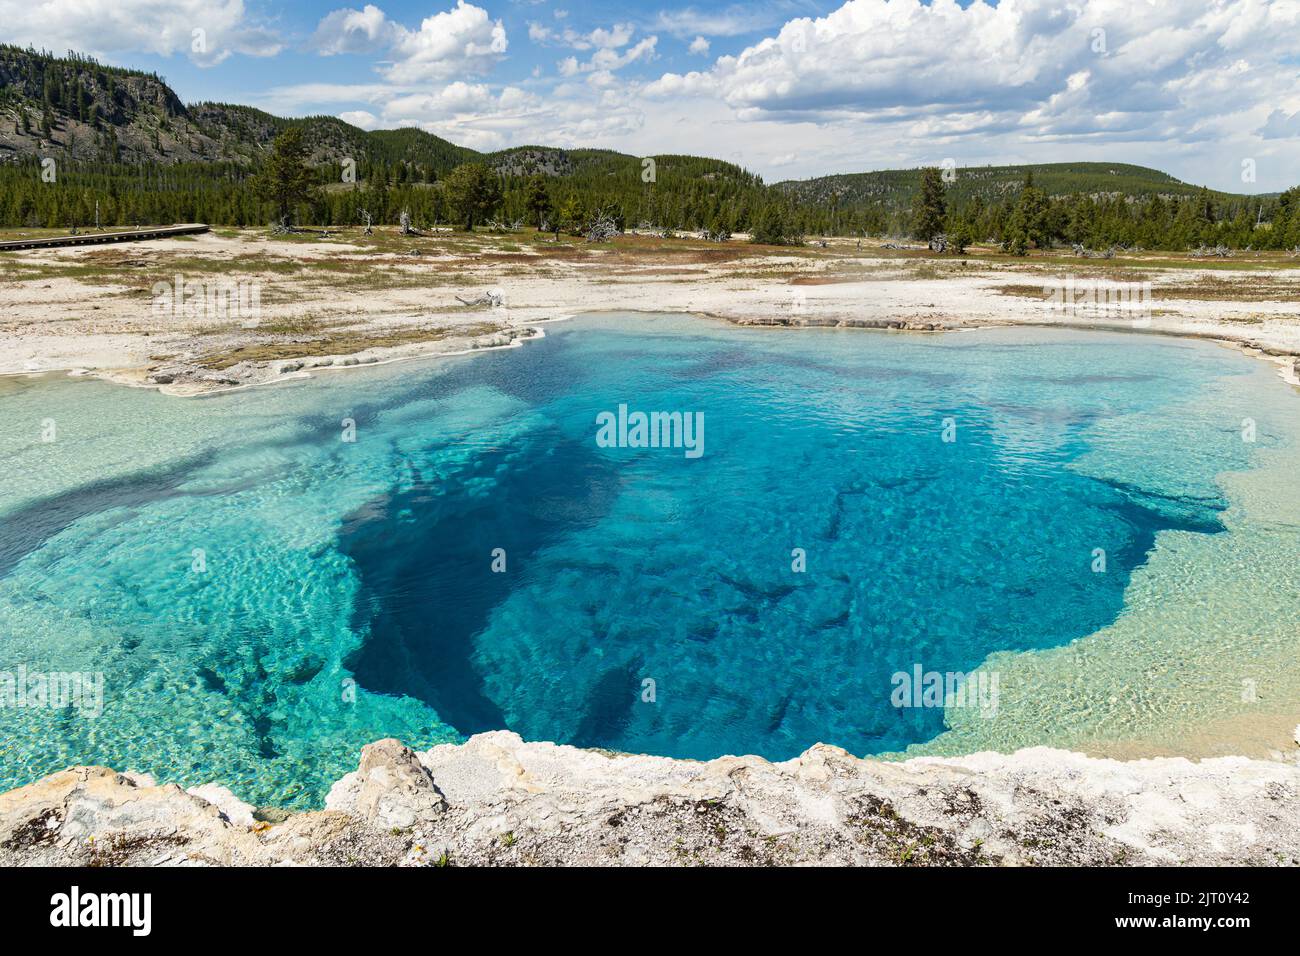 Saphire Pool in Yellowstone's Biscuit Basin, Yellowstone National Park, Wyoming, USA Stock Photo